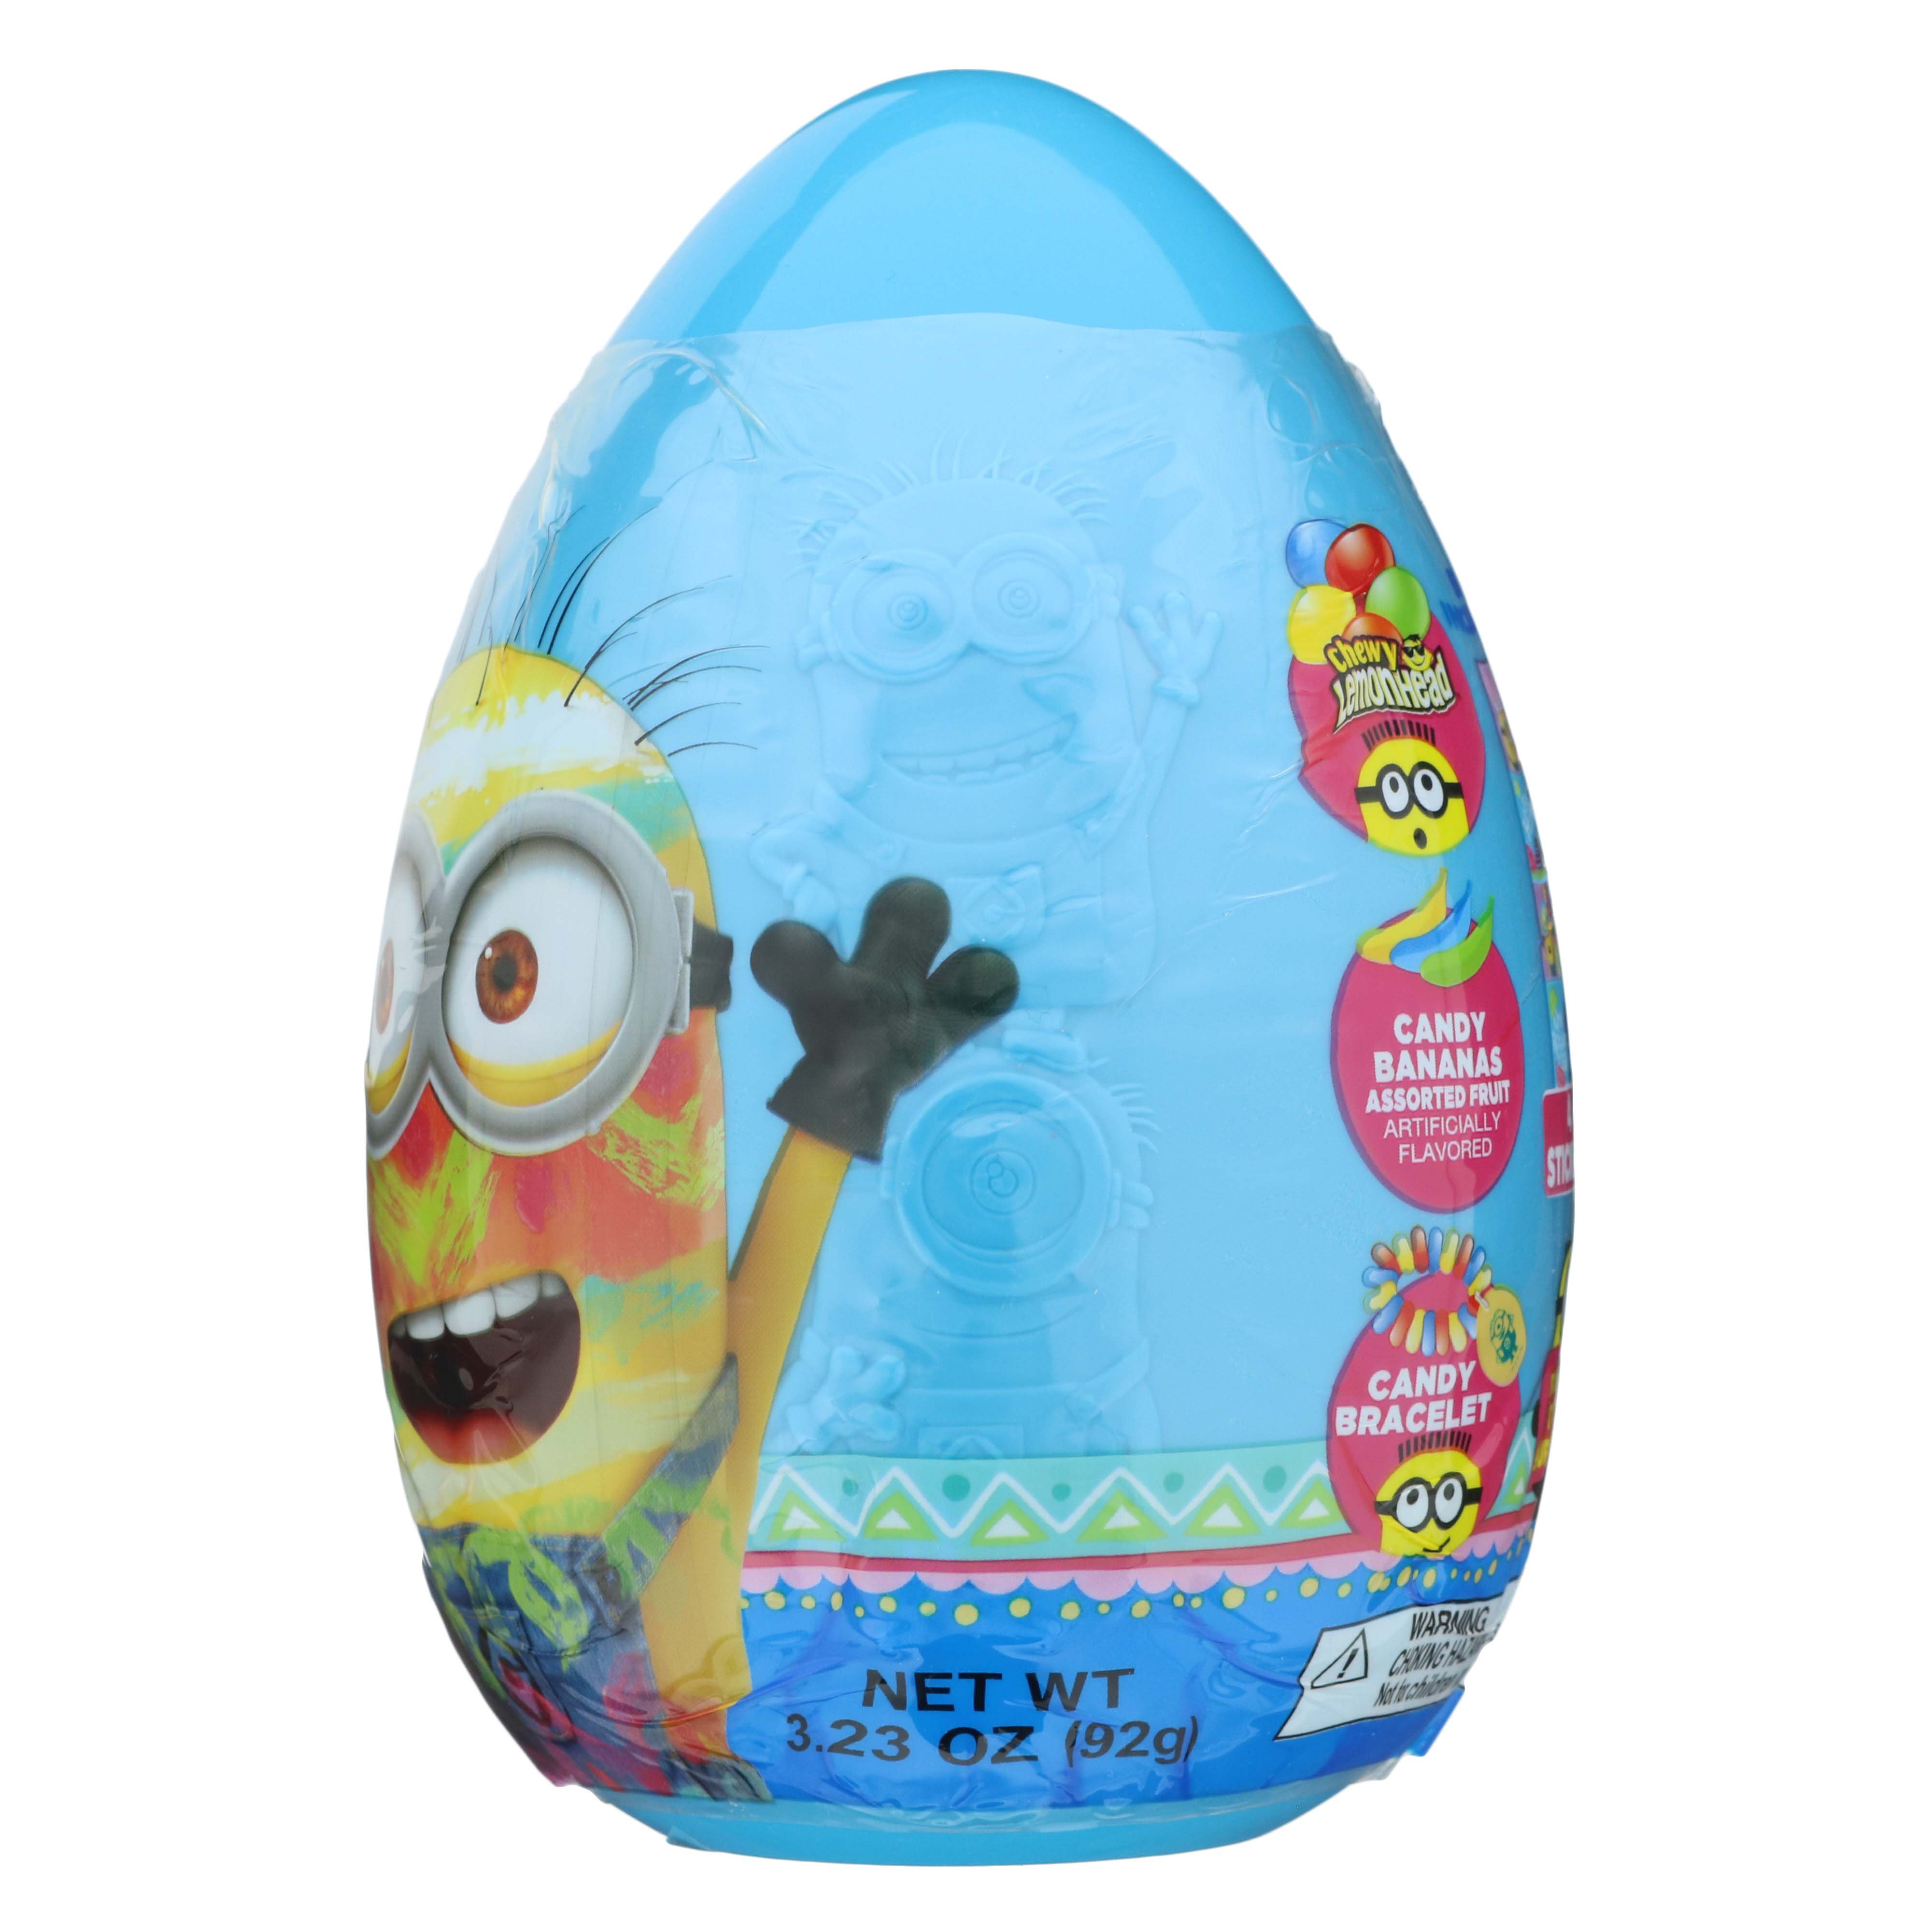 Galerie Despicable Me Minion Jumbo Easter Egg Assortment - Shop Candy at H-E-B